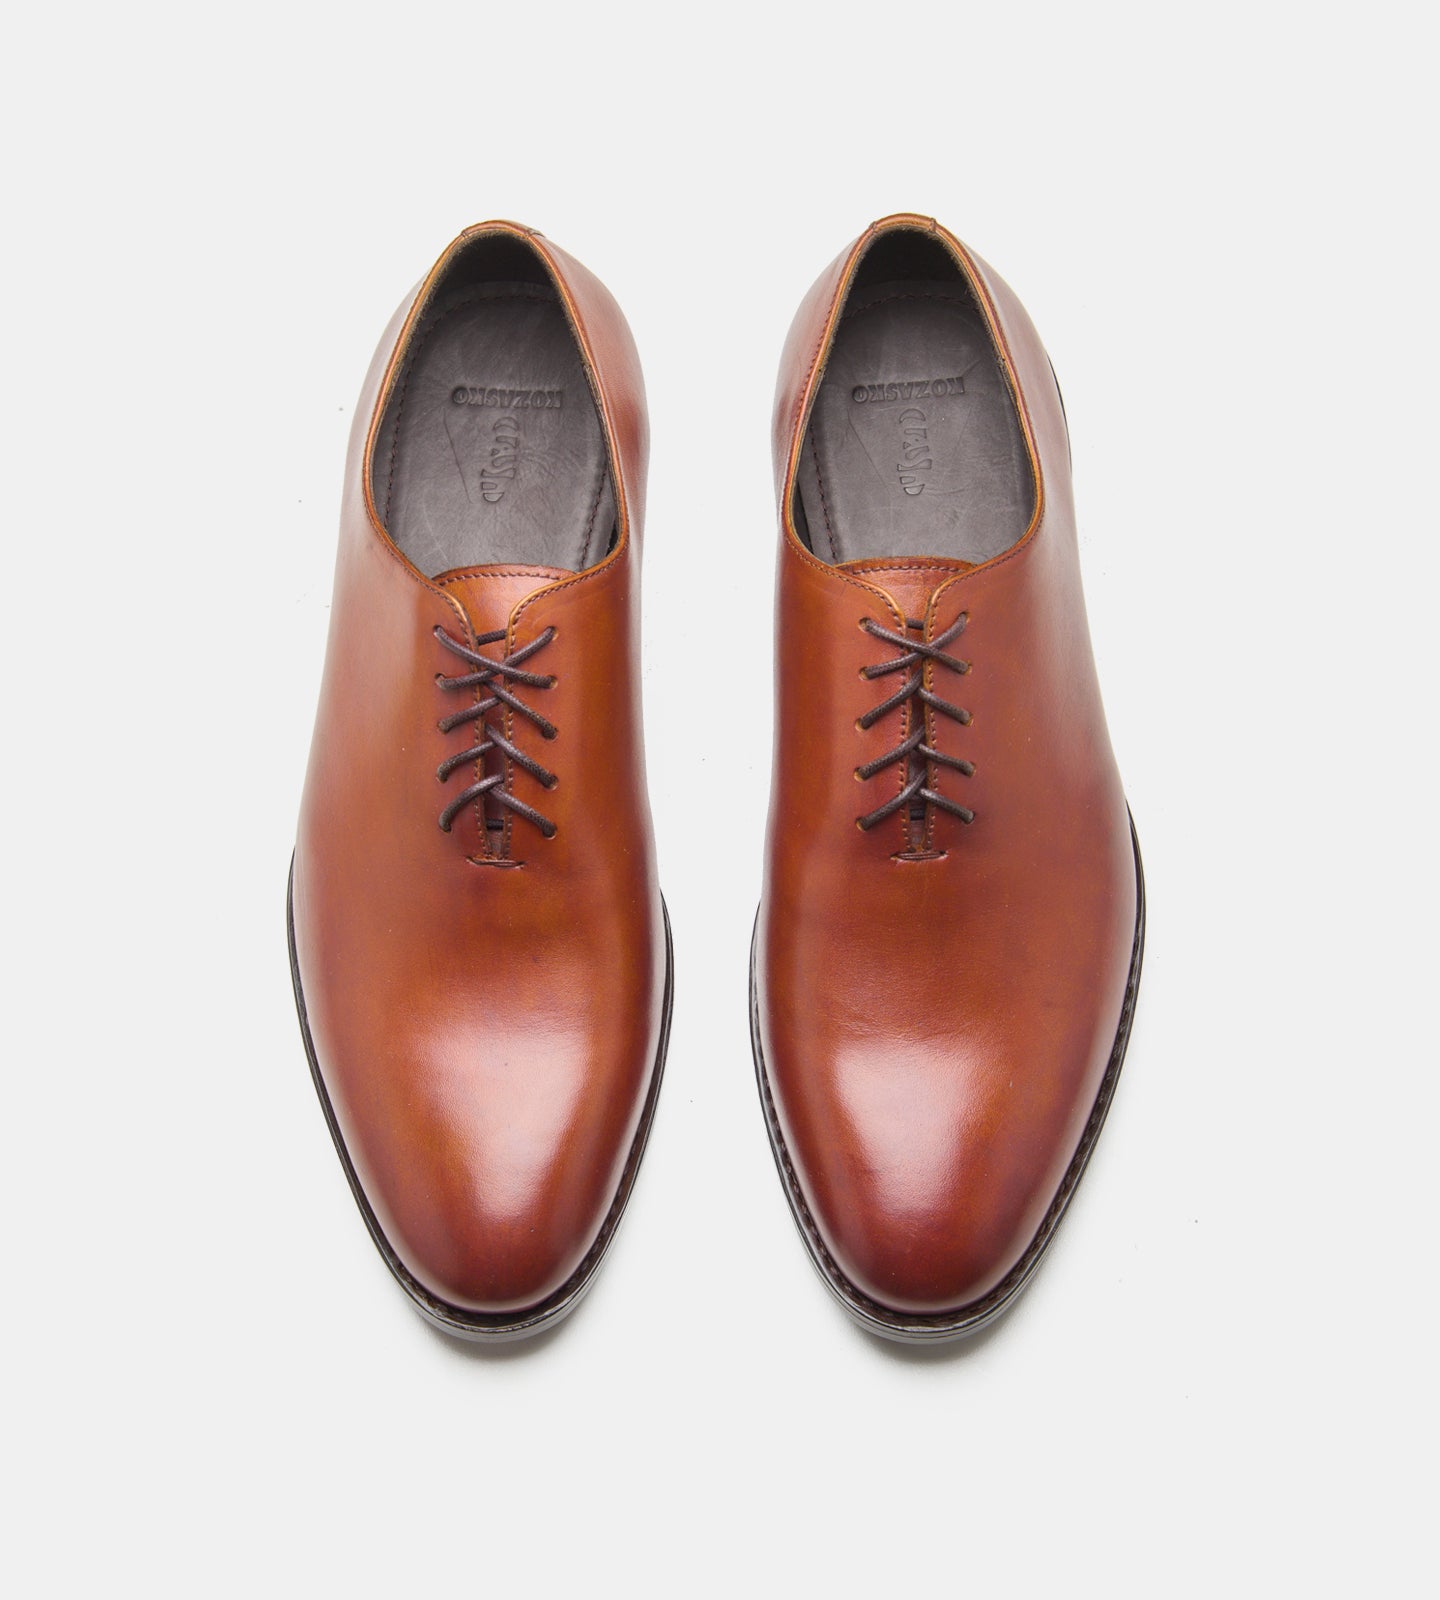 Goodyear Welted Cognac Wholecut Oxfords